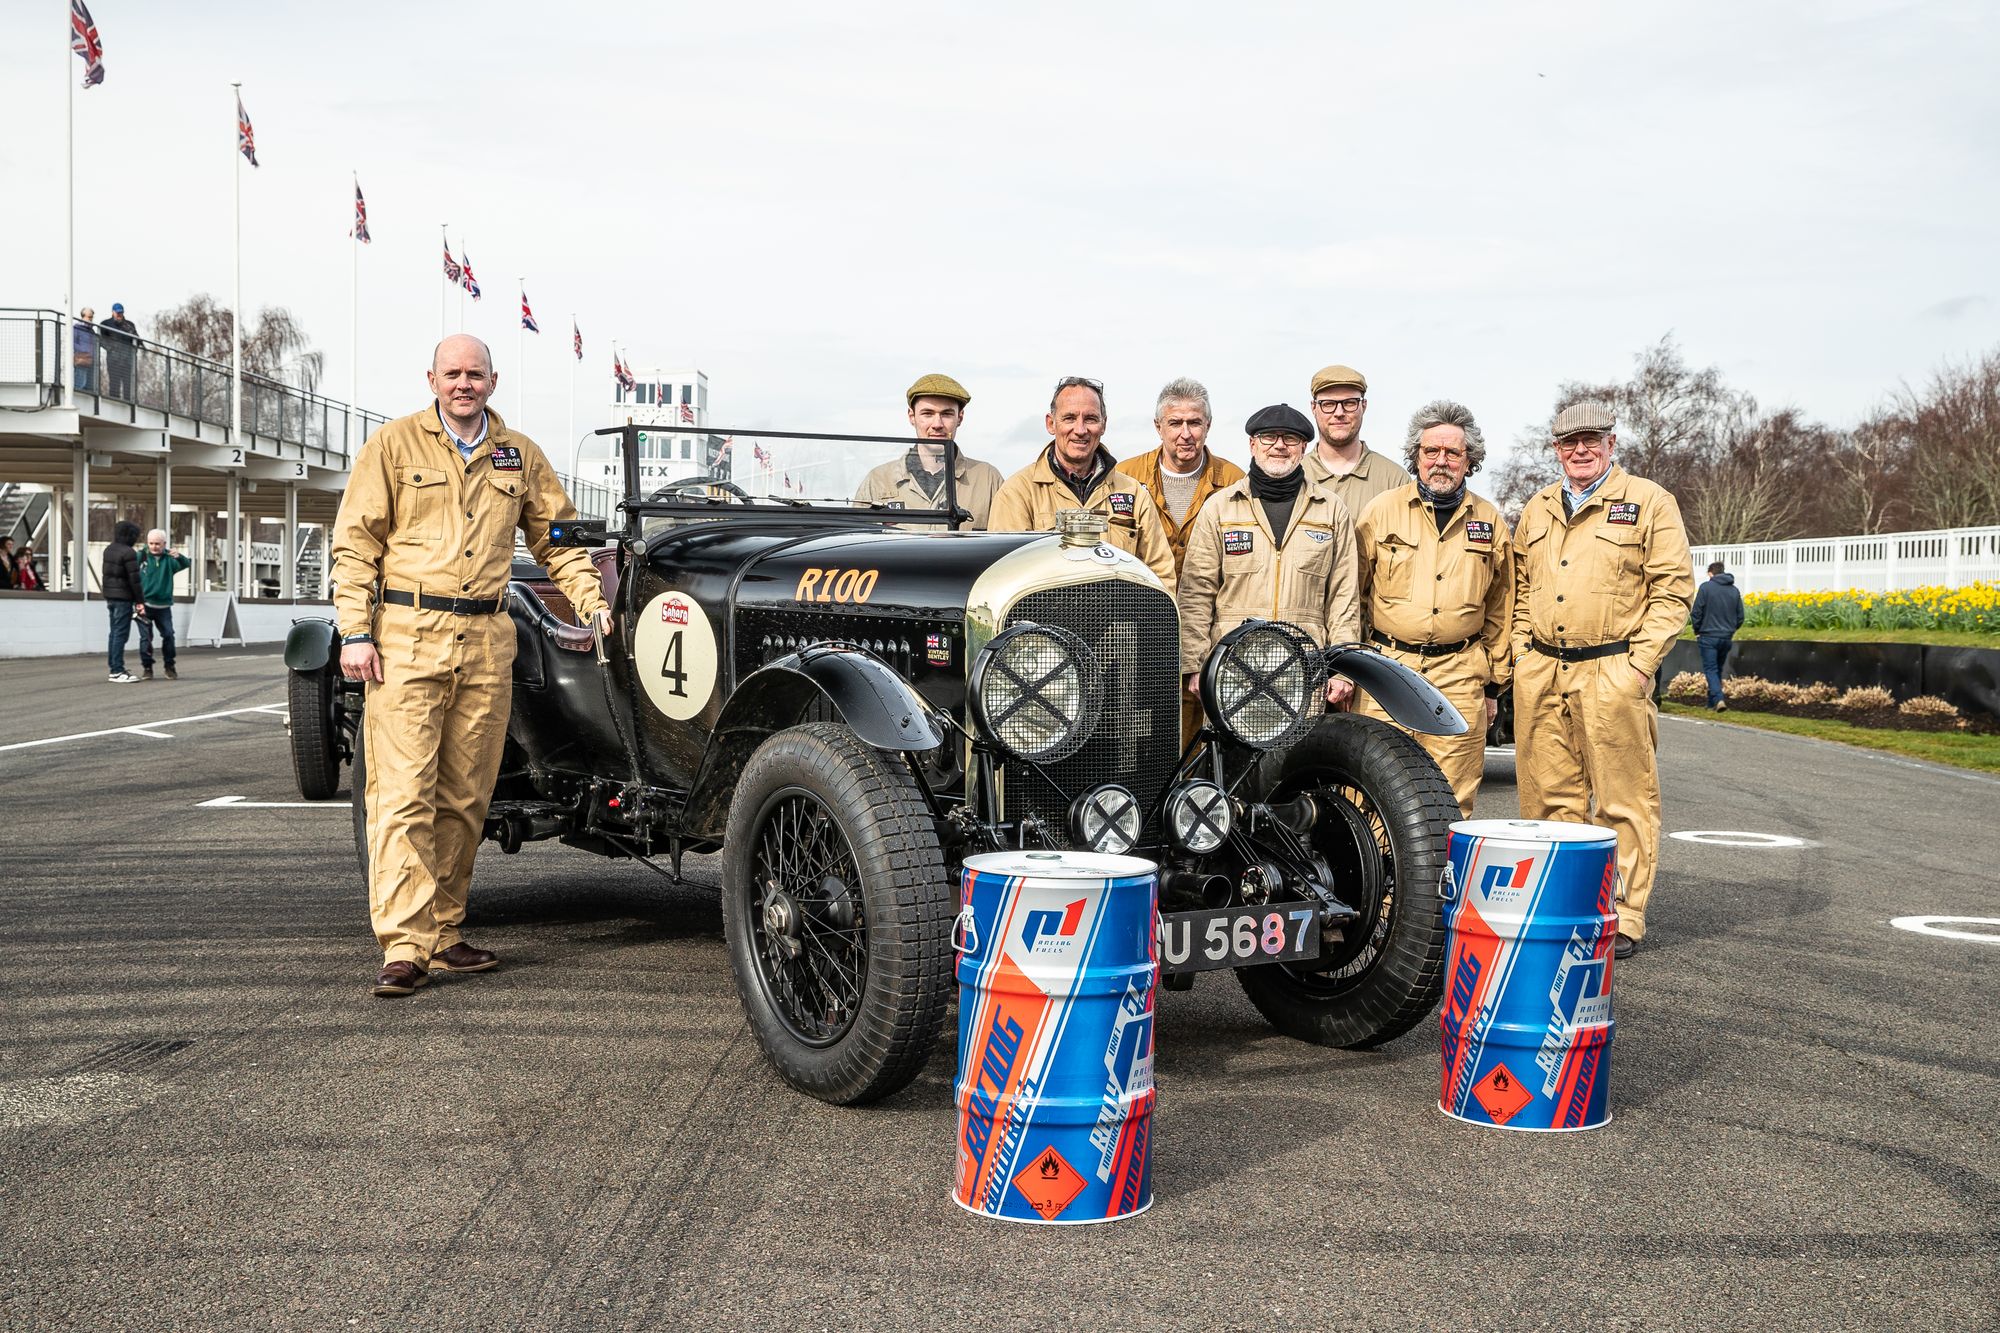 BENTLEY'S FIRST WIN ON SYNTHETIC FUEL